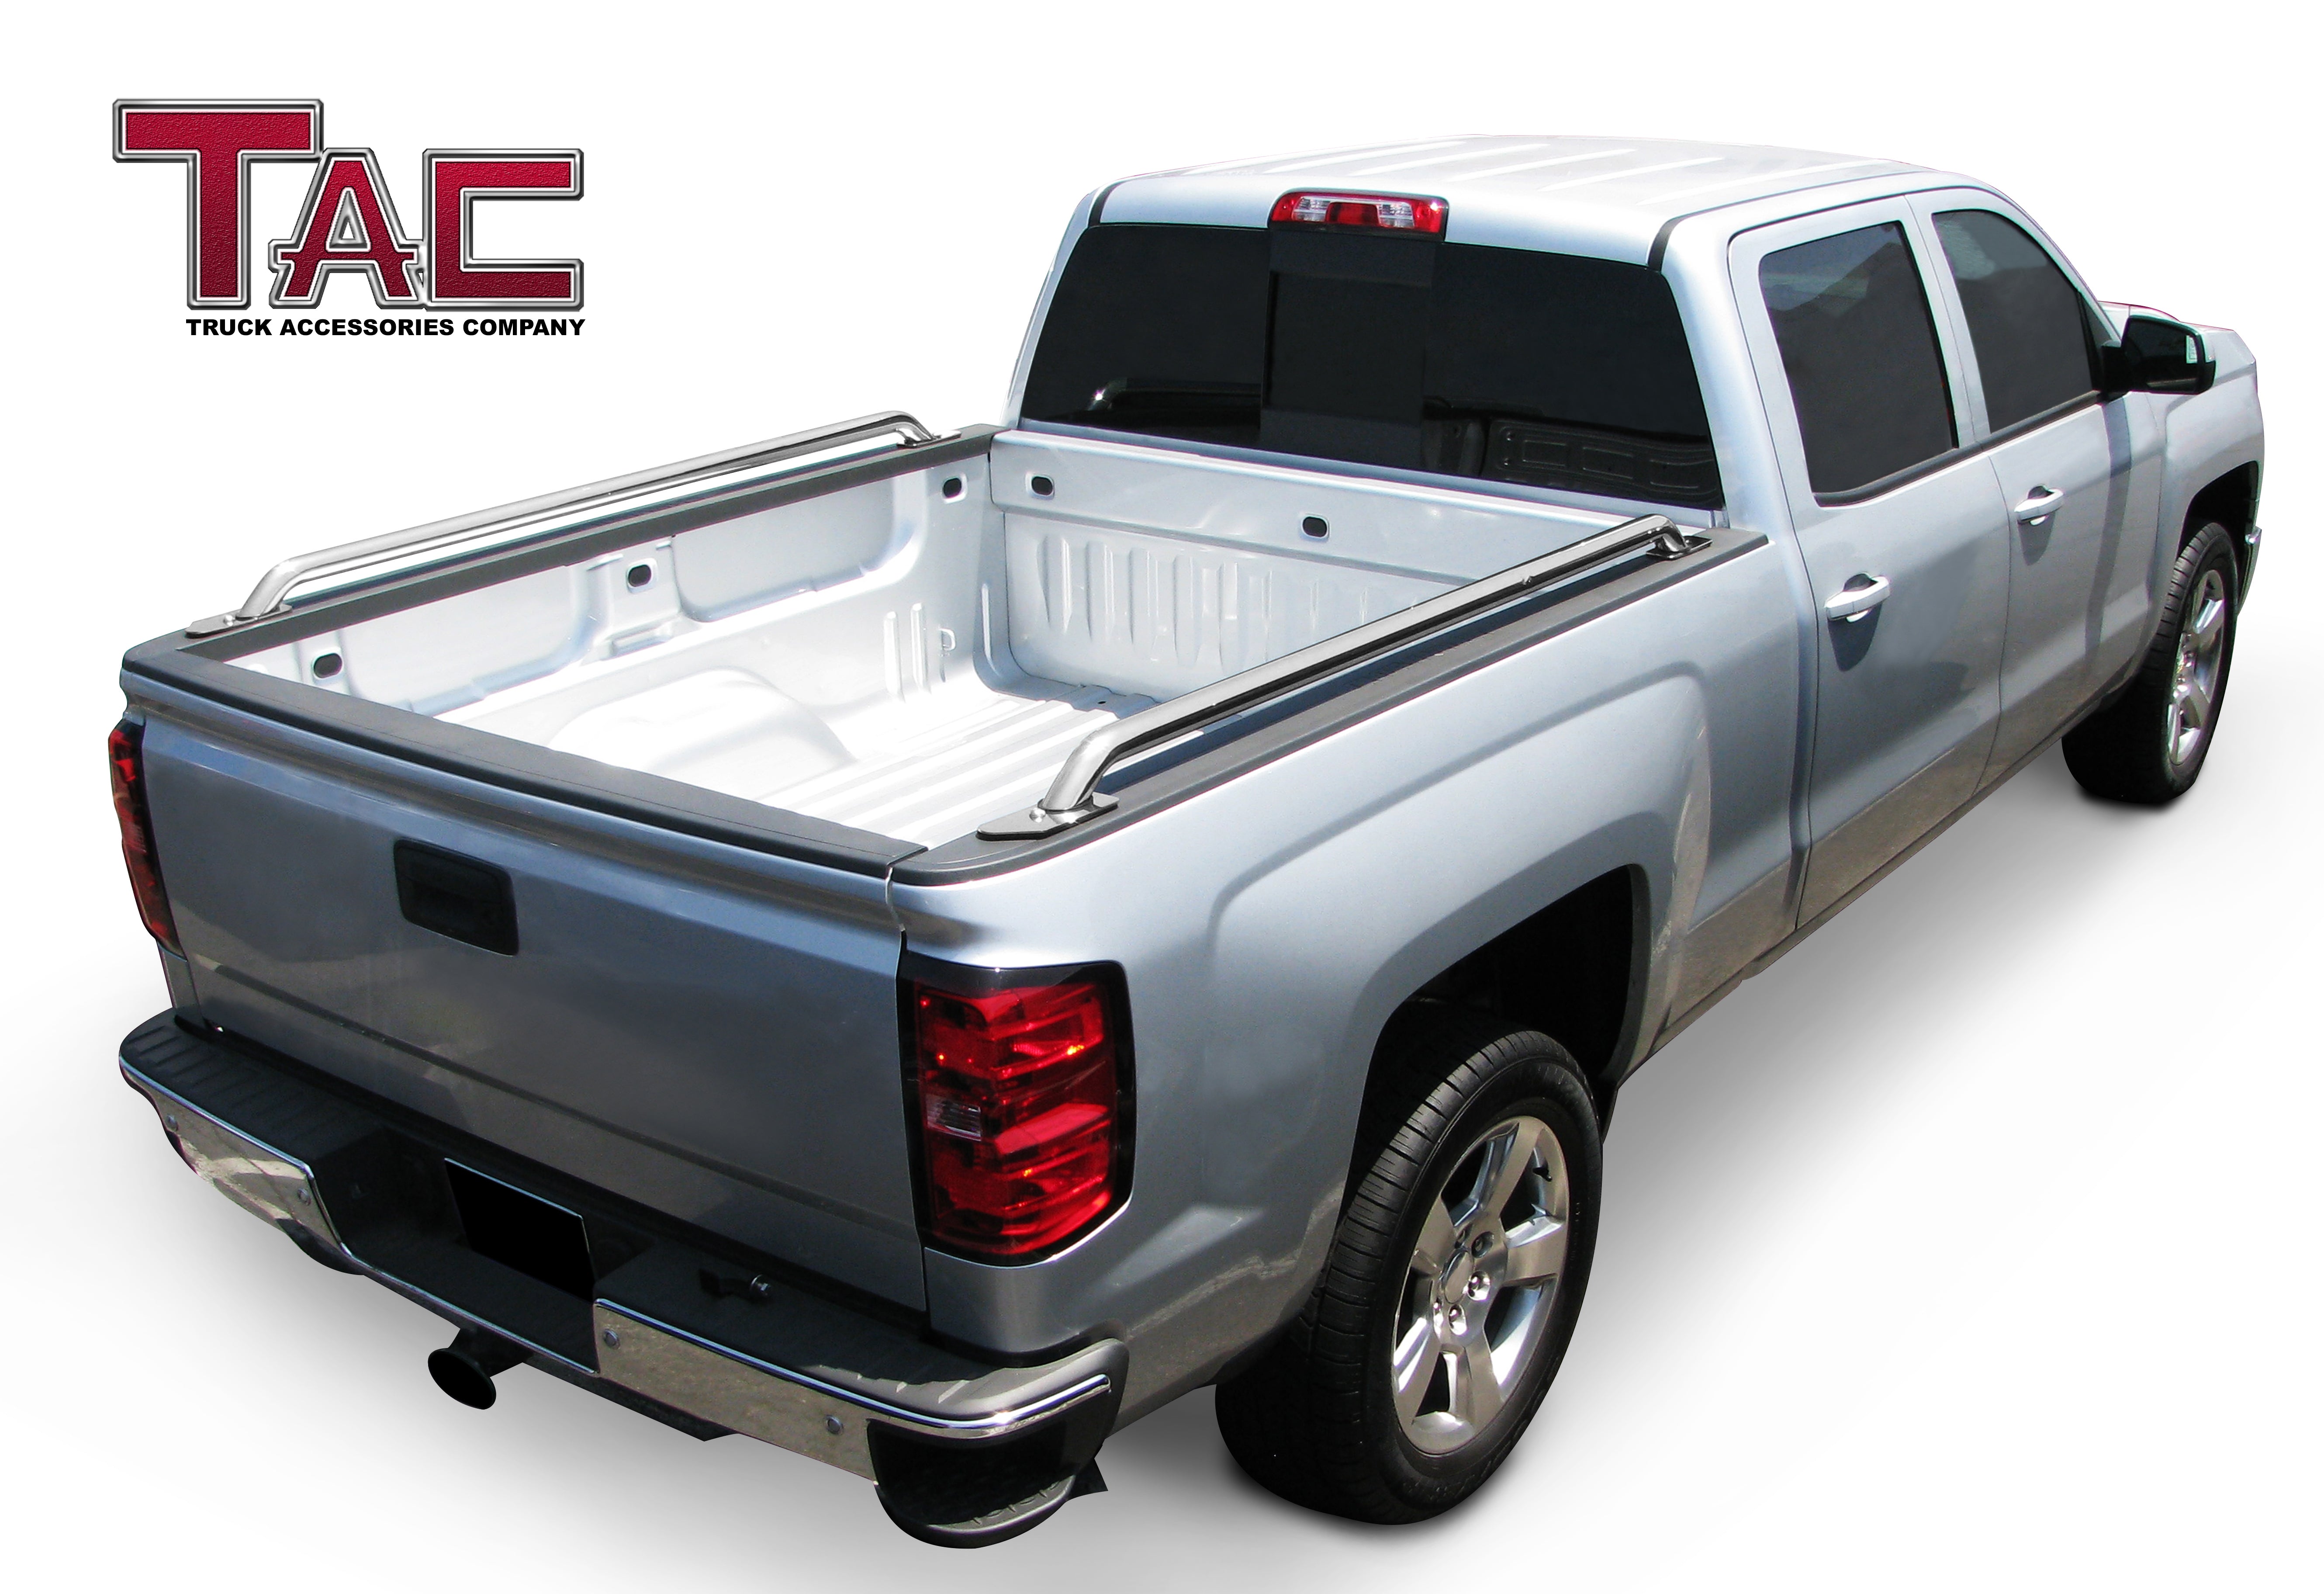 TAC Bed Rails Compatible with 1997-2014 Ford F150 5.5' Short Bed (Exclude Super Crew w/5.5' Short Bed) 304 Stainless Steel Truck Side Rails 2 Pieces - 0